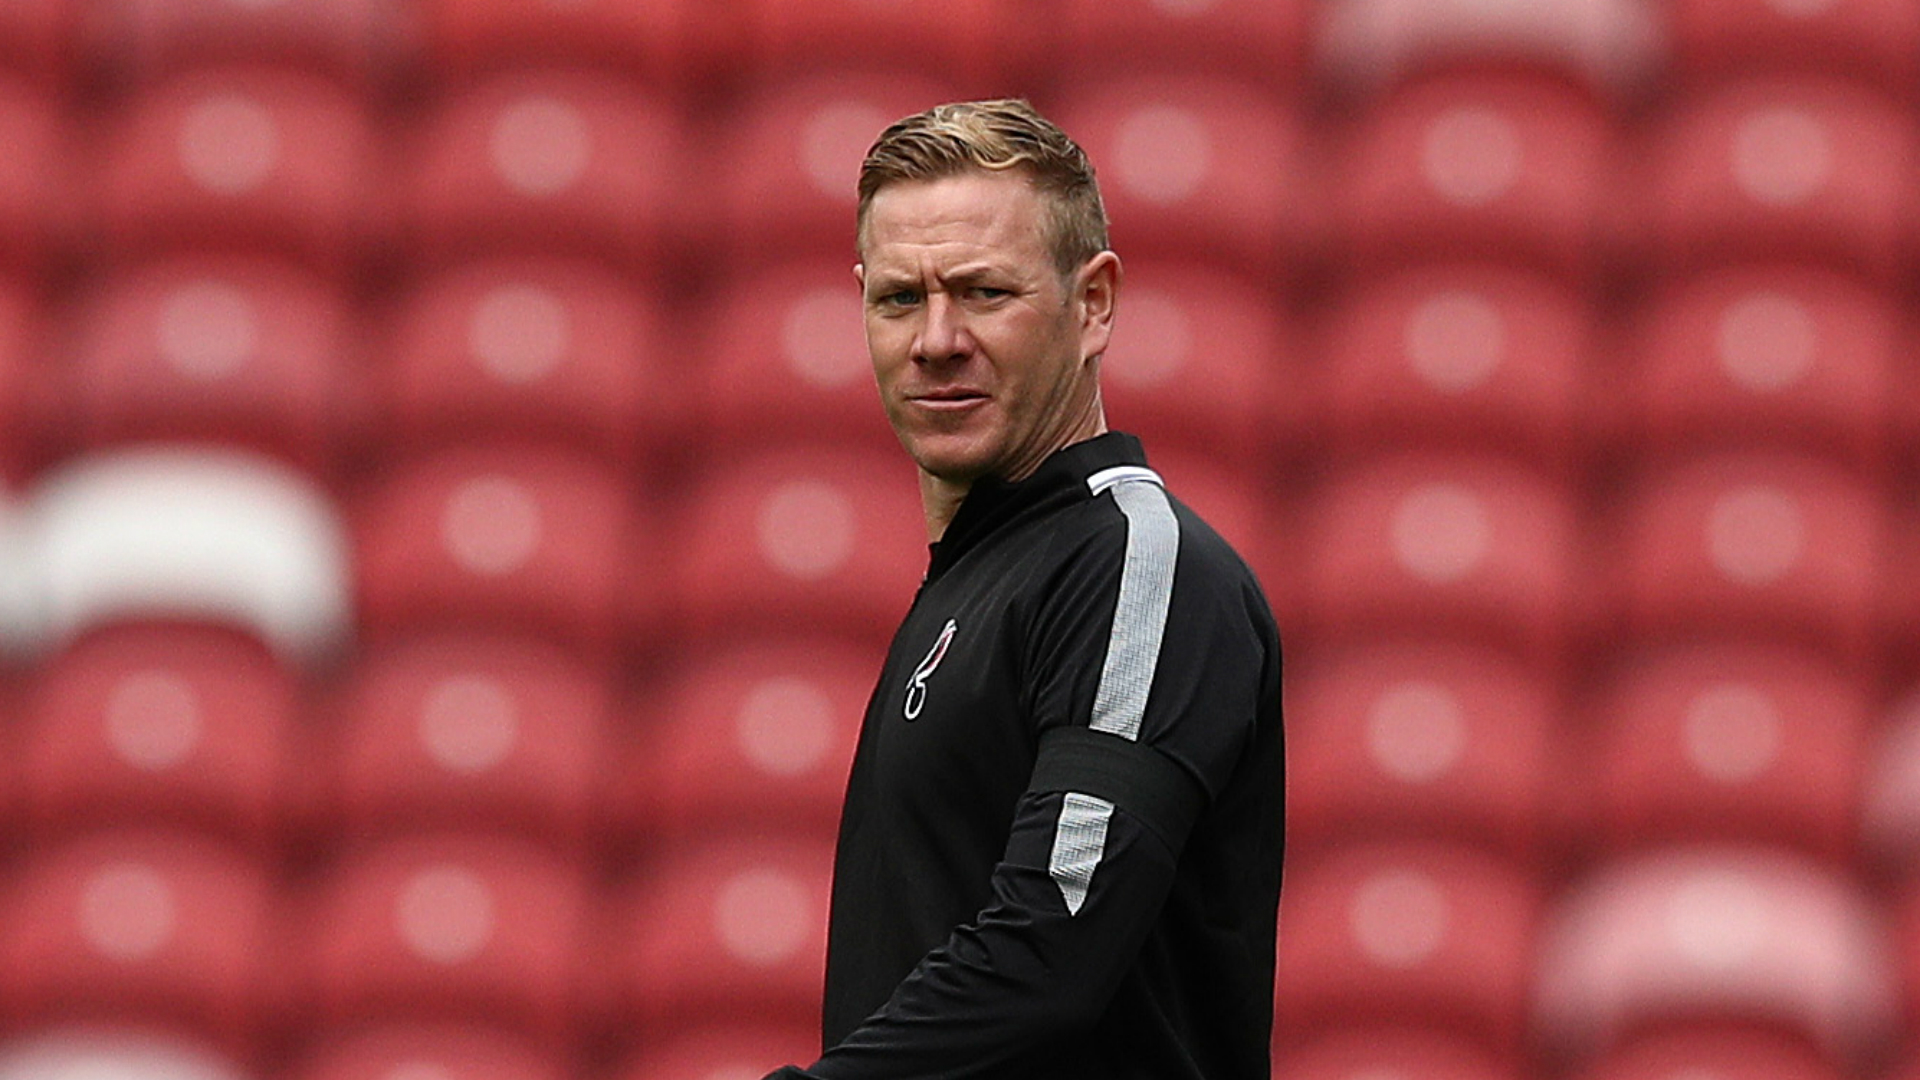 Liam Manning Appointed as New Bristol City Head Coach